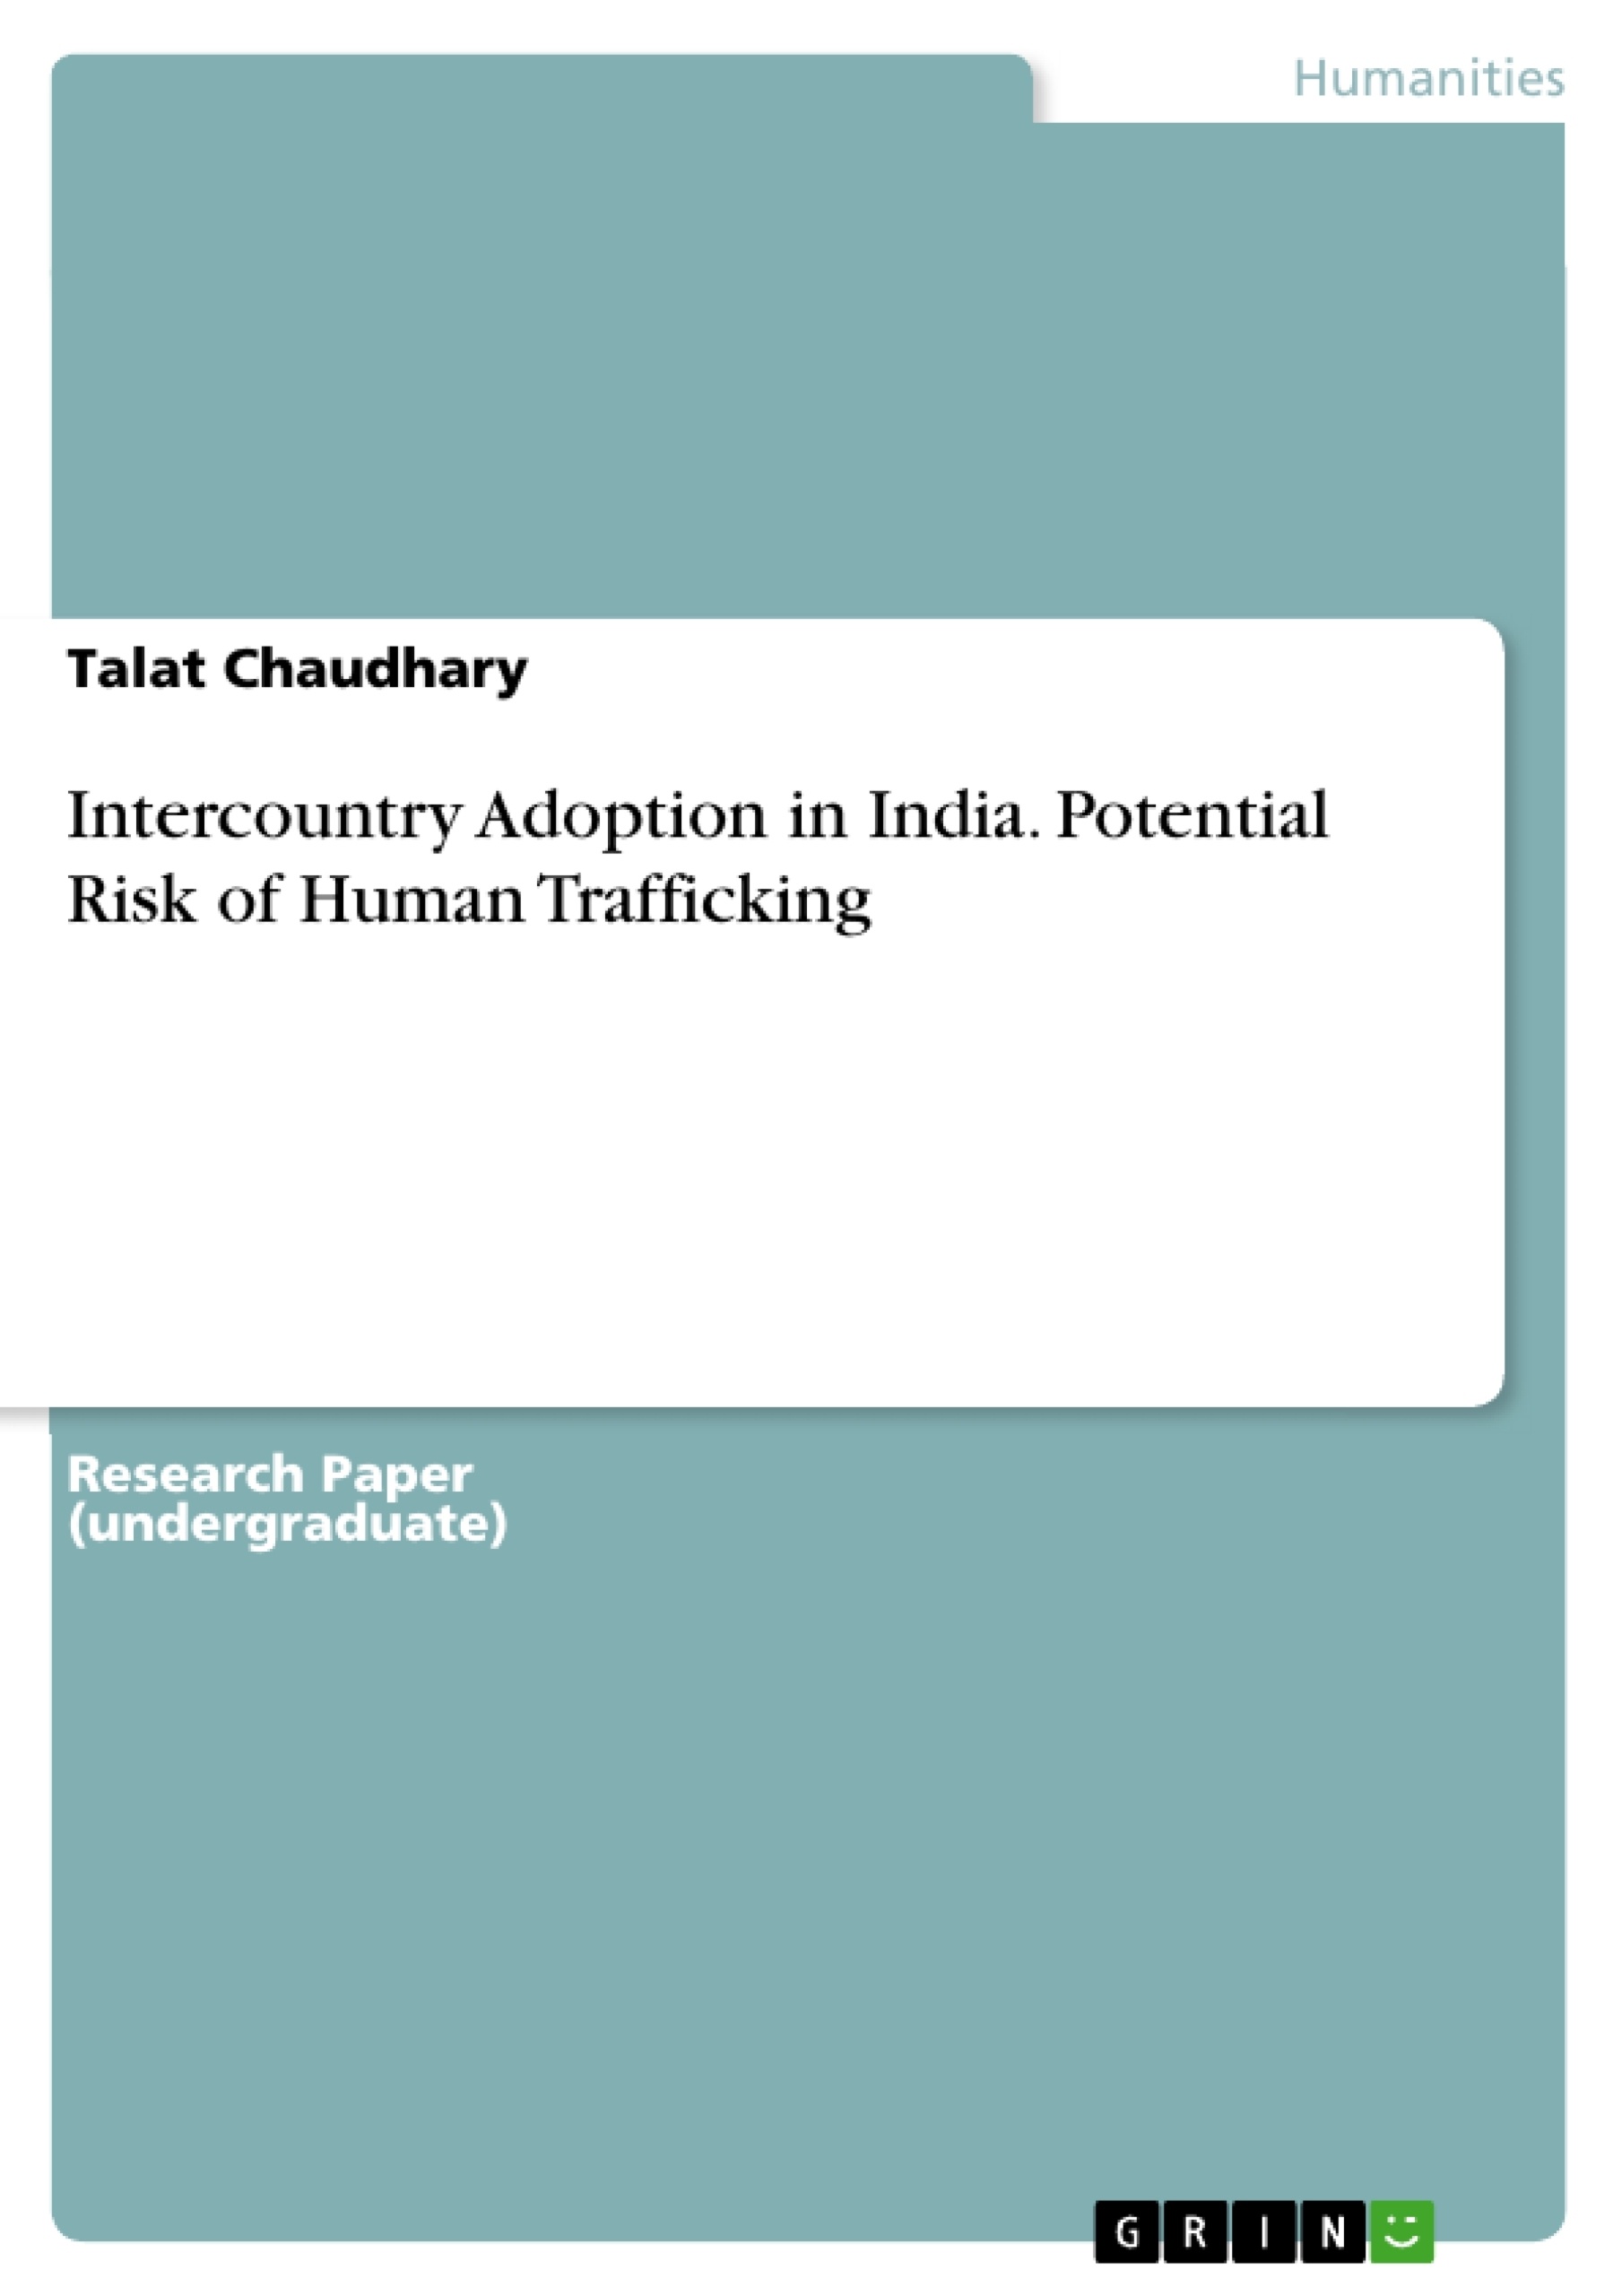 Title: Intercountry Adoption in India. Potential Risk of Human Trafficking